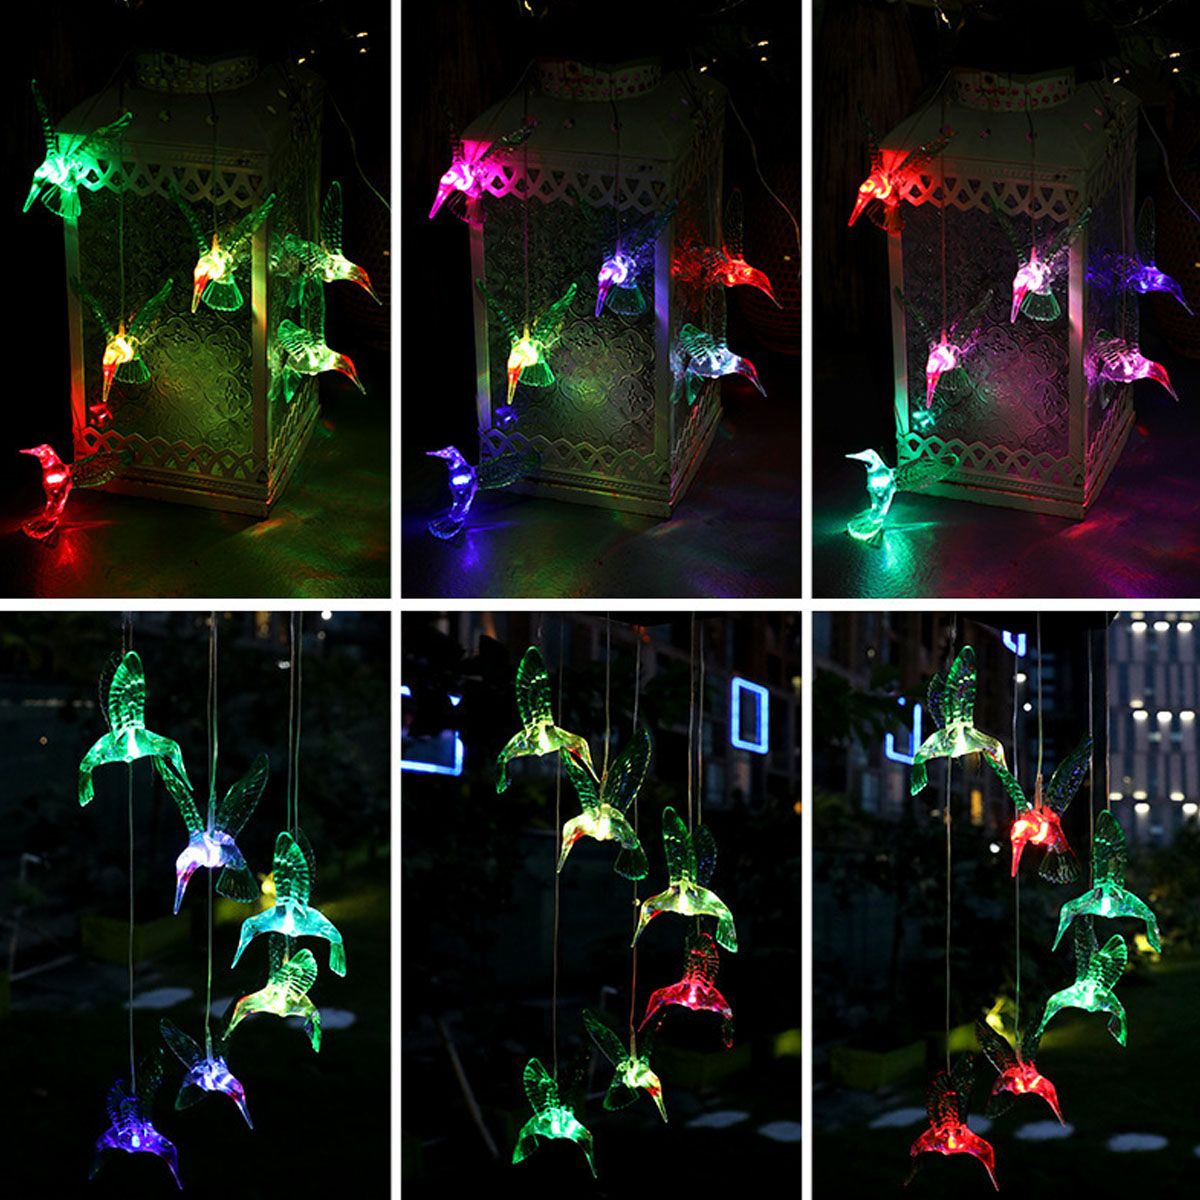 Solar-Powered-LED-Wind-Chime-Light-Color-Changing-Garden-Lamp-Outdoor-Tree-Decor-1712053